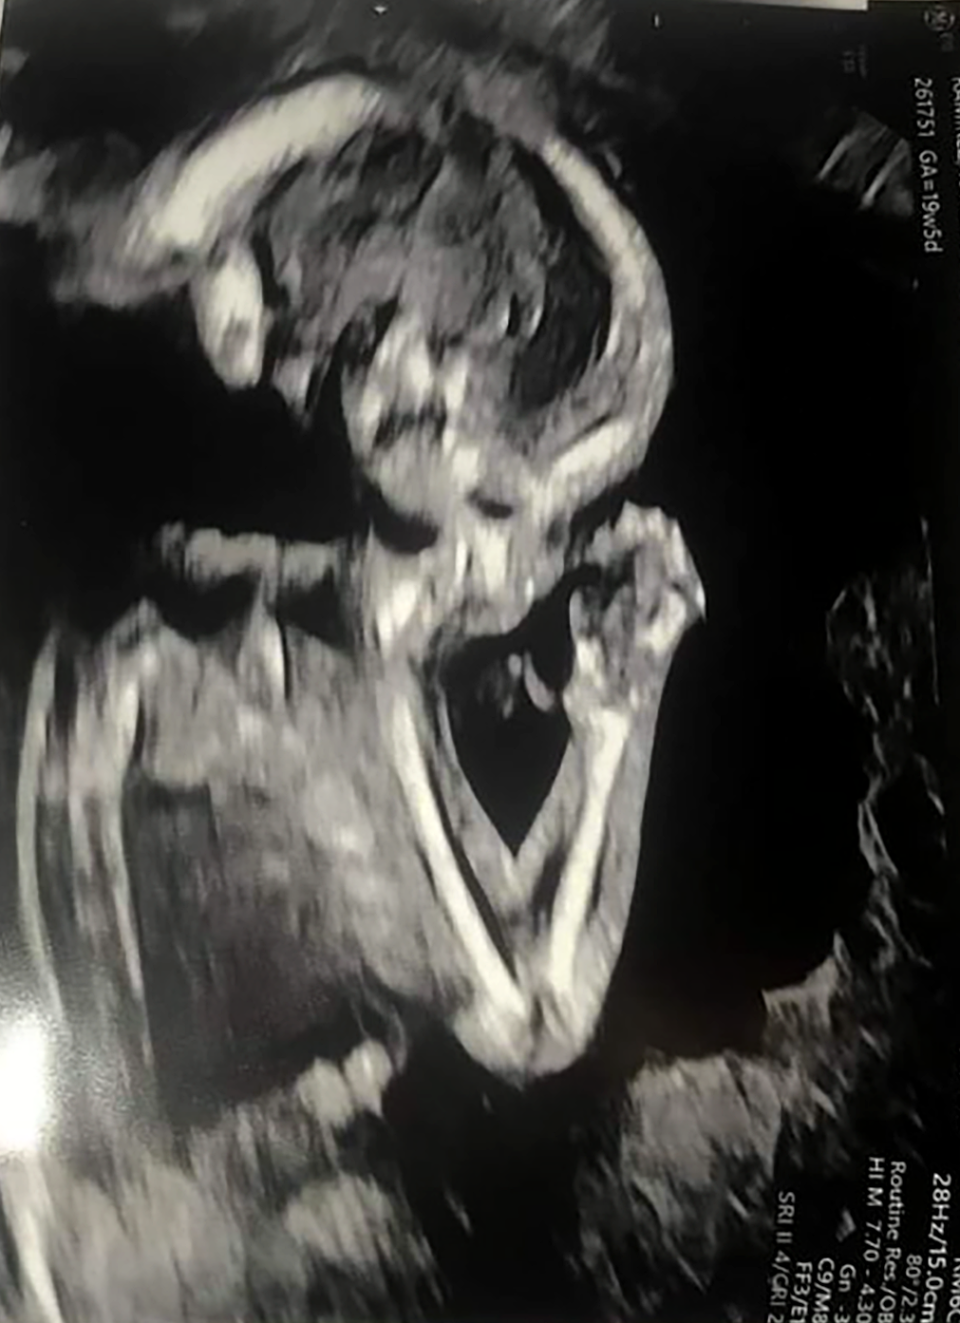 Justin Johnson often refers to this ultrasound image of his daughter, Amillianna Ramirez-Johnson, taken at Columbia St. Mary's Hospital on April 26, 2021, as a forewarning she was asking for help. “She was praying. She knew something was going to happen,” Johnson said.